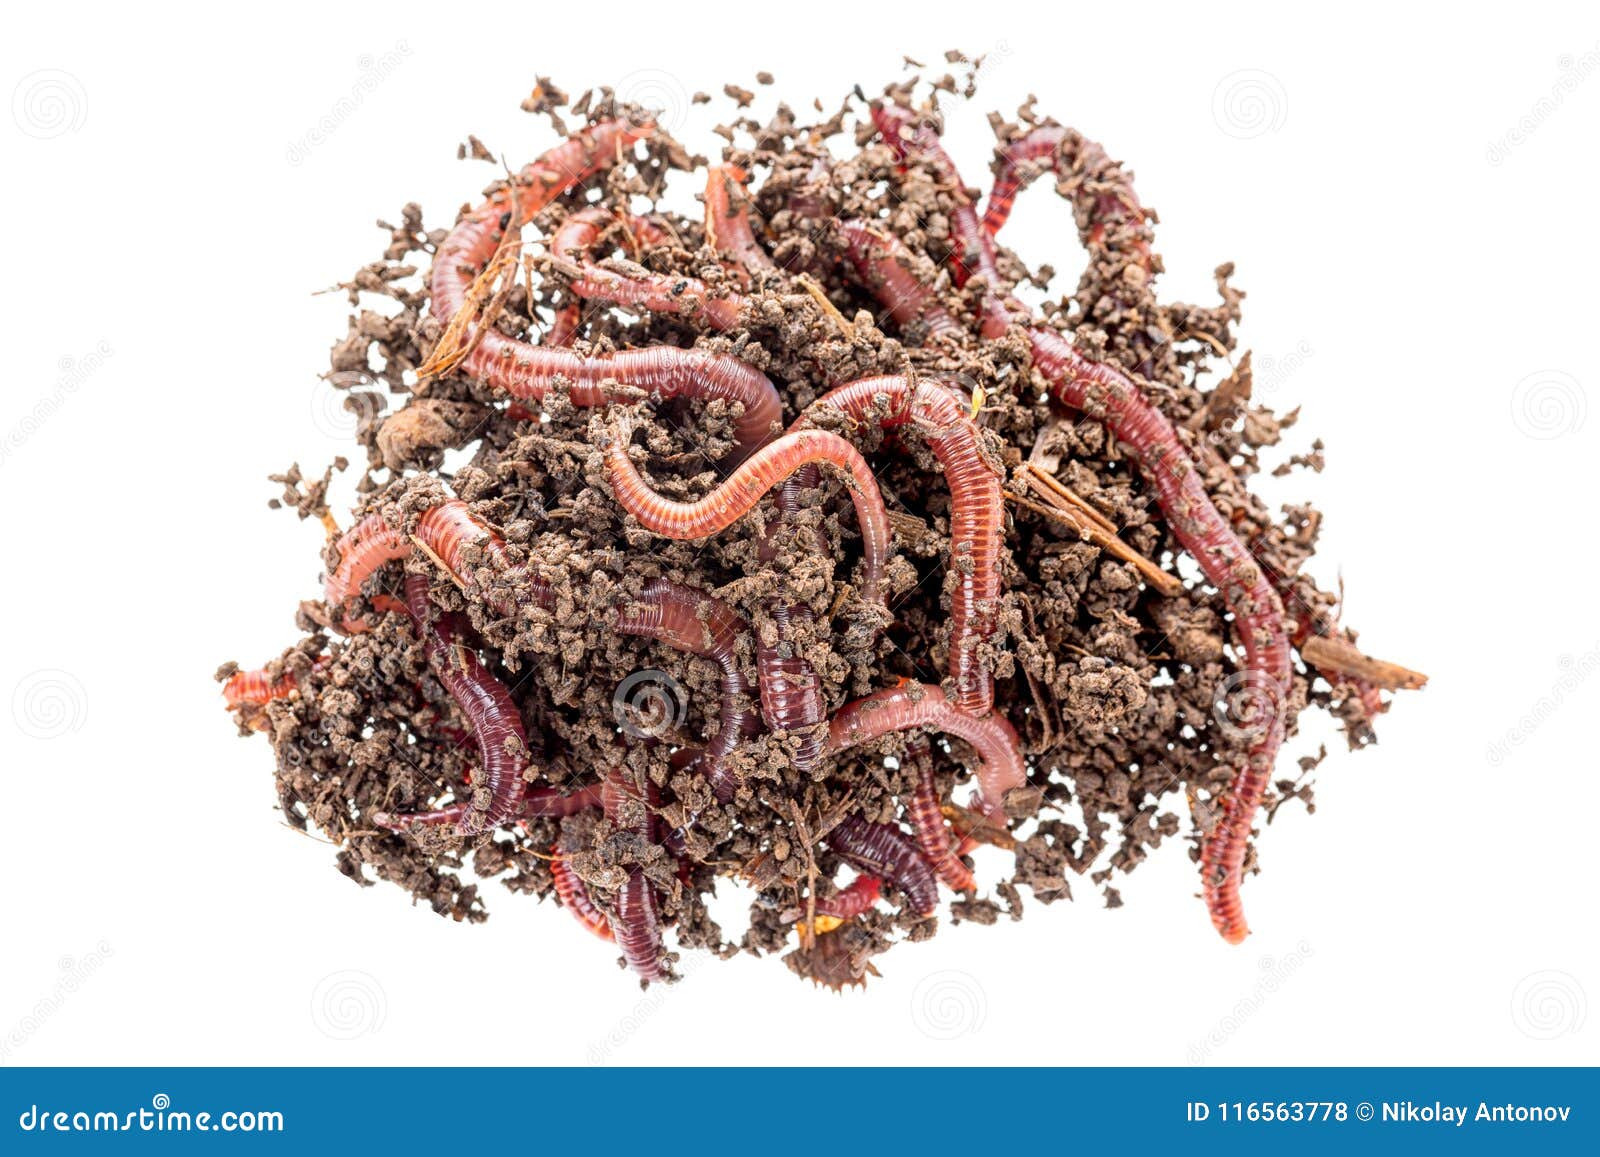 Macro Shot of Red Worms Dendrobena in Manure, Earthworm Live Bait for  Fishing Isolated on White Background. Stock Photo - Image of isolated,  ecology: 116563778